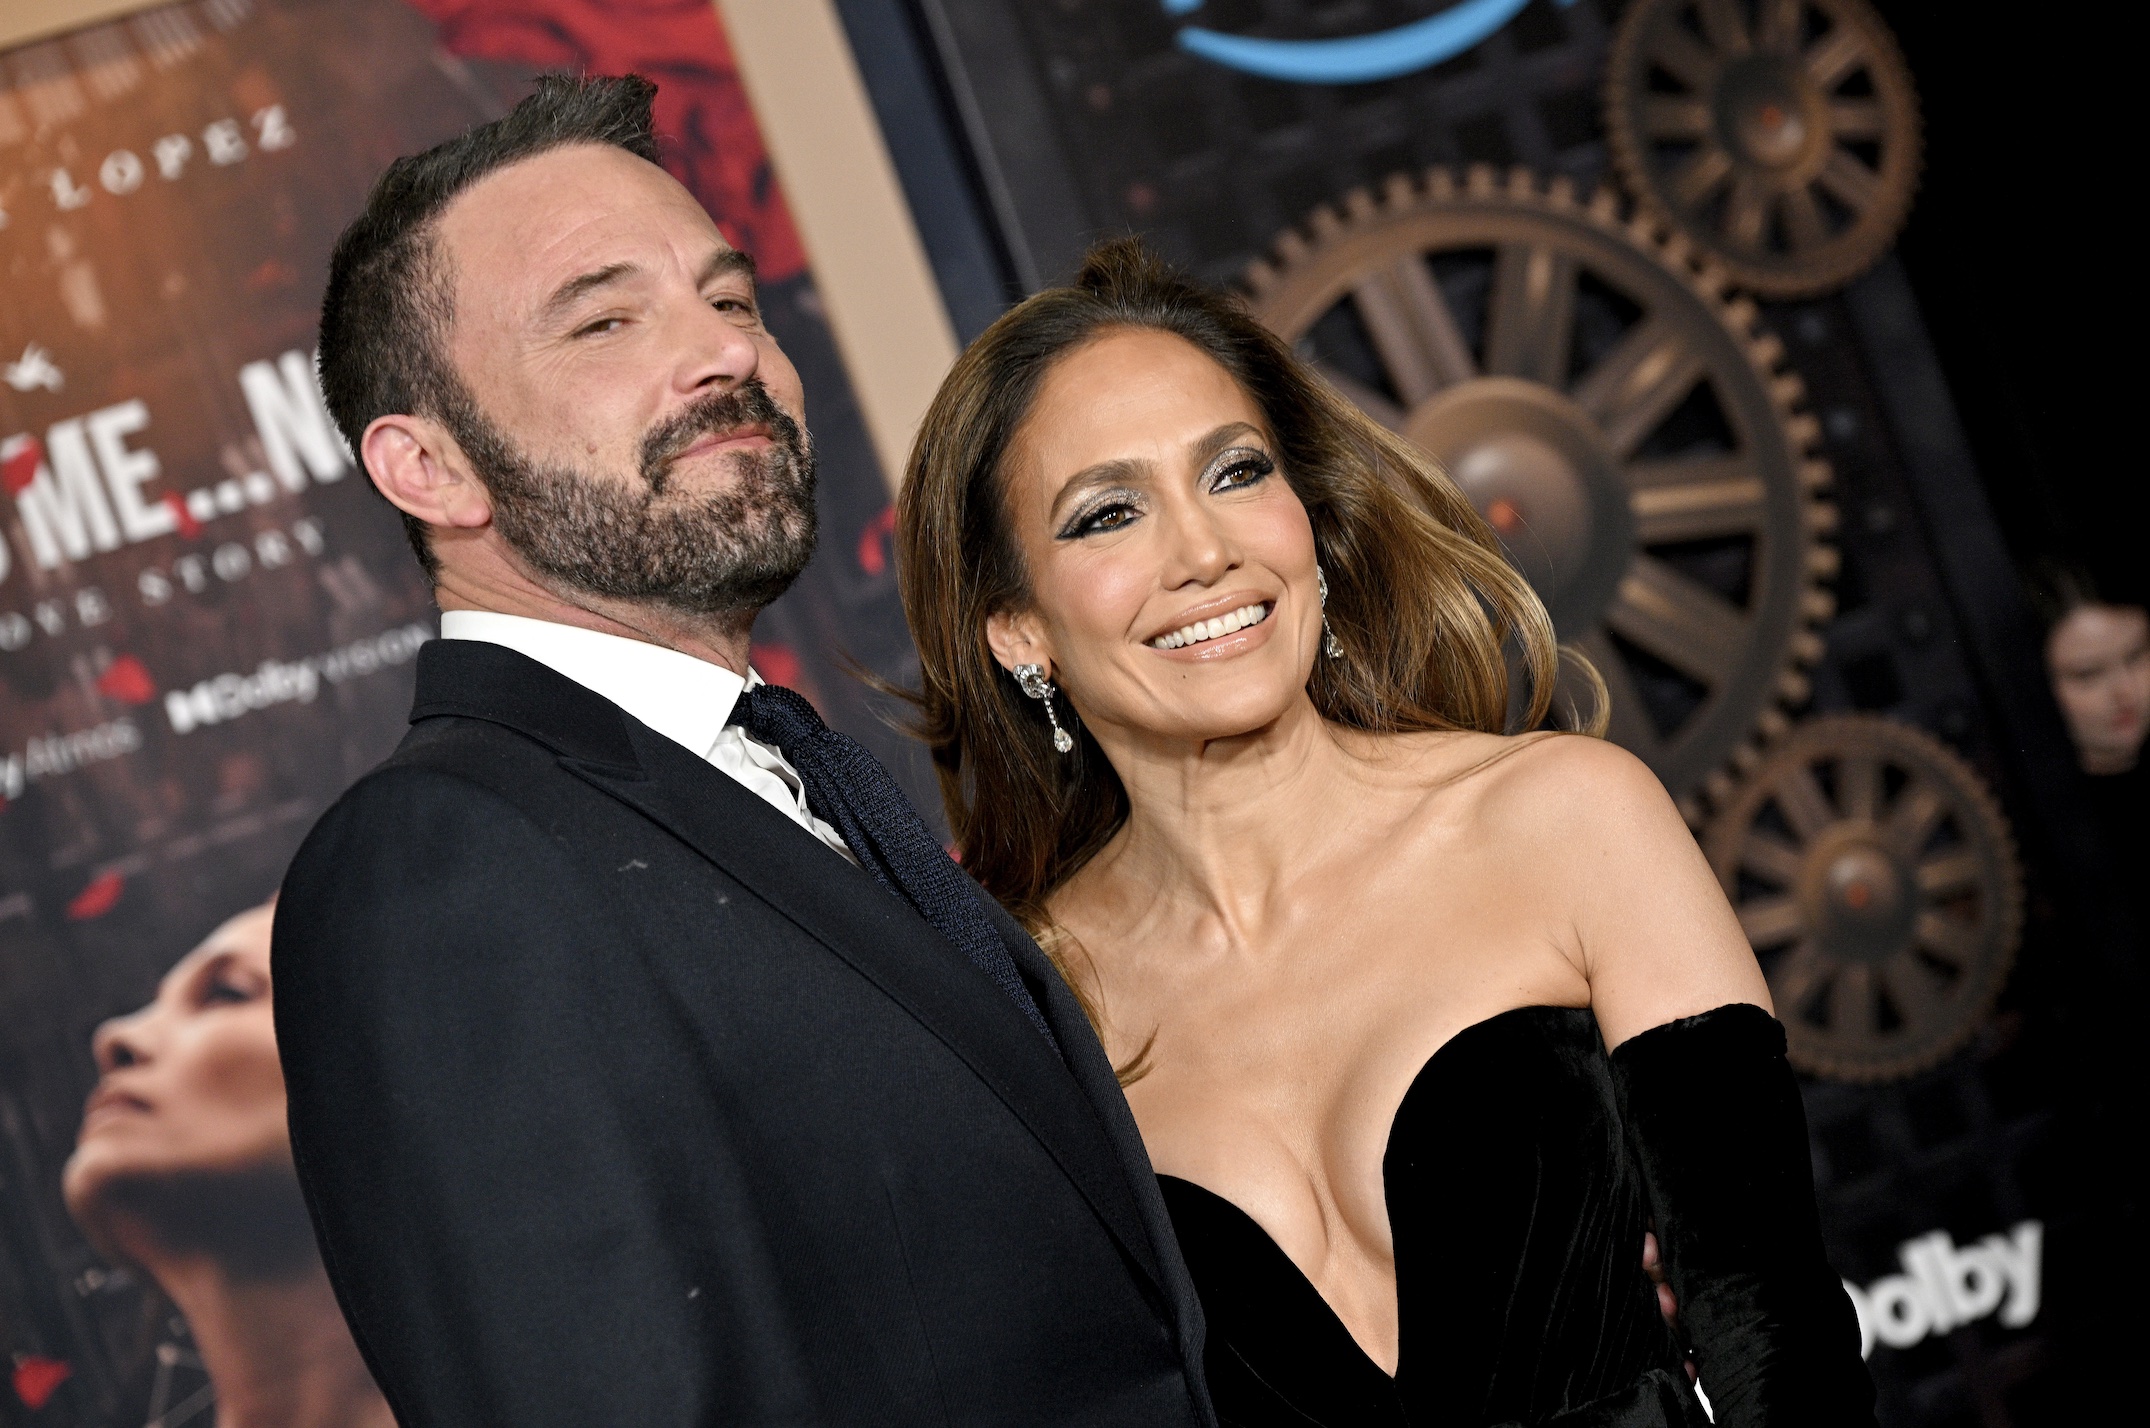 Jennifer Lopez says husband Ben Affleck was a “reluctant” participant in new documentary